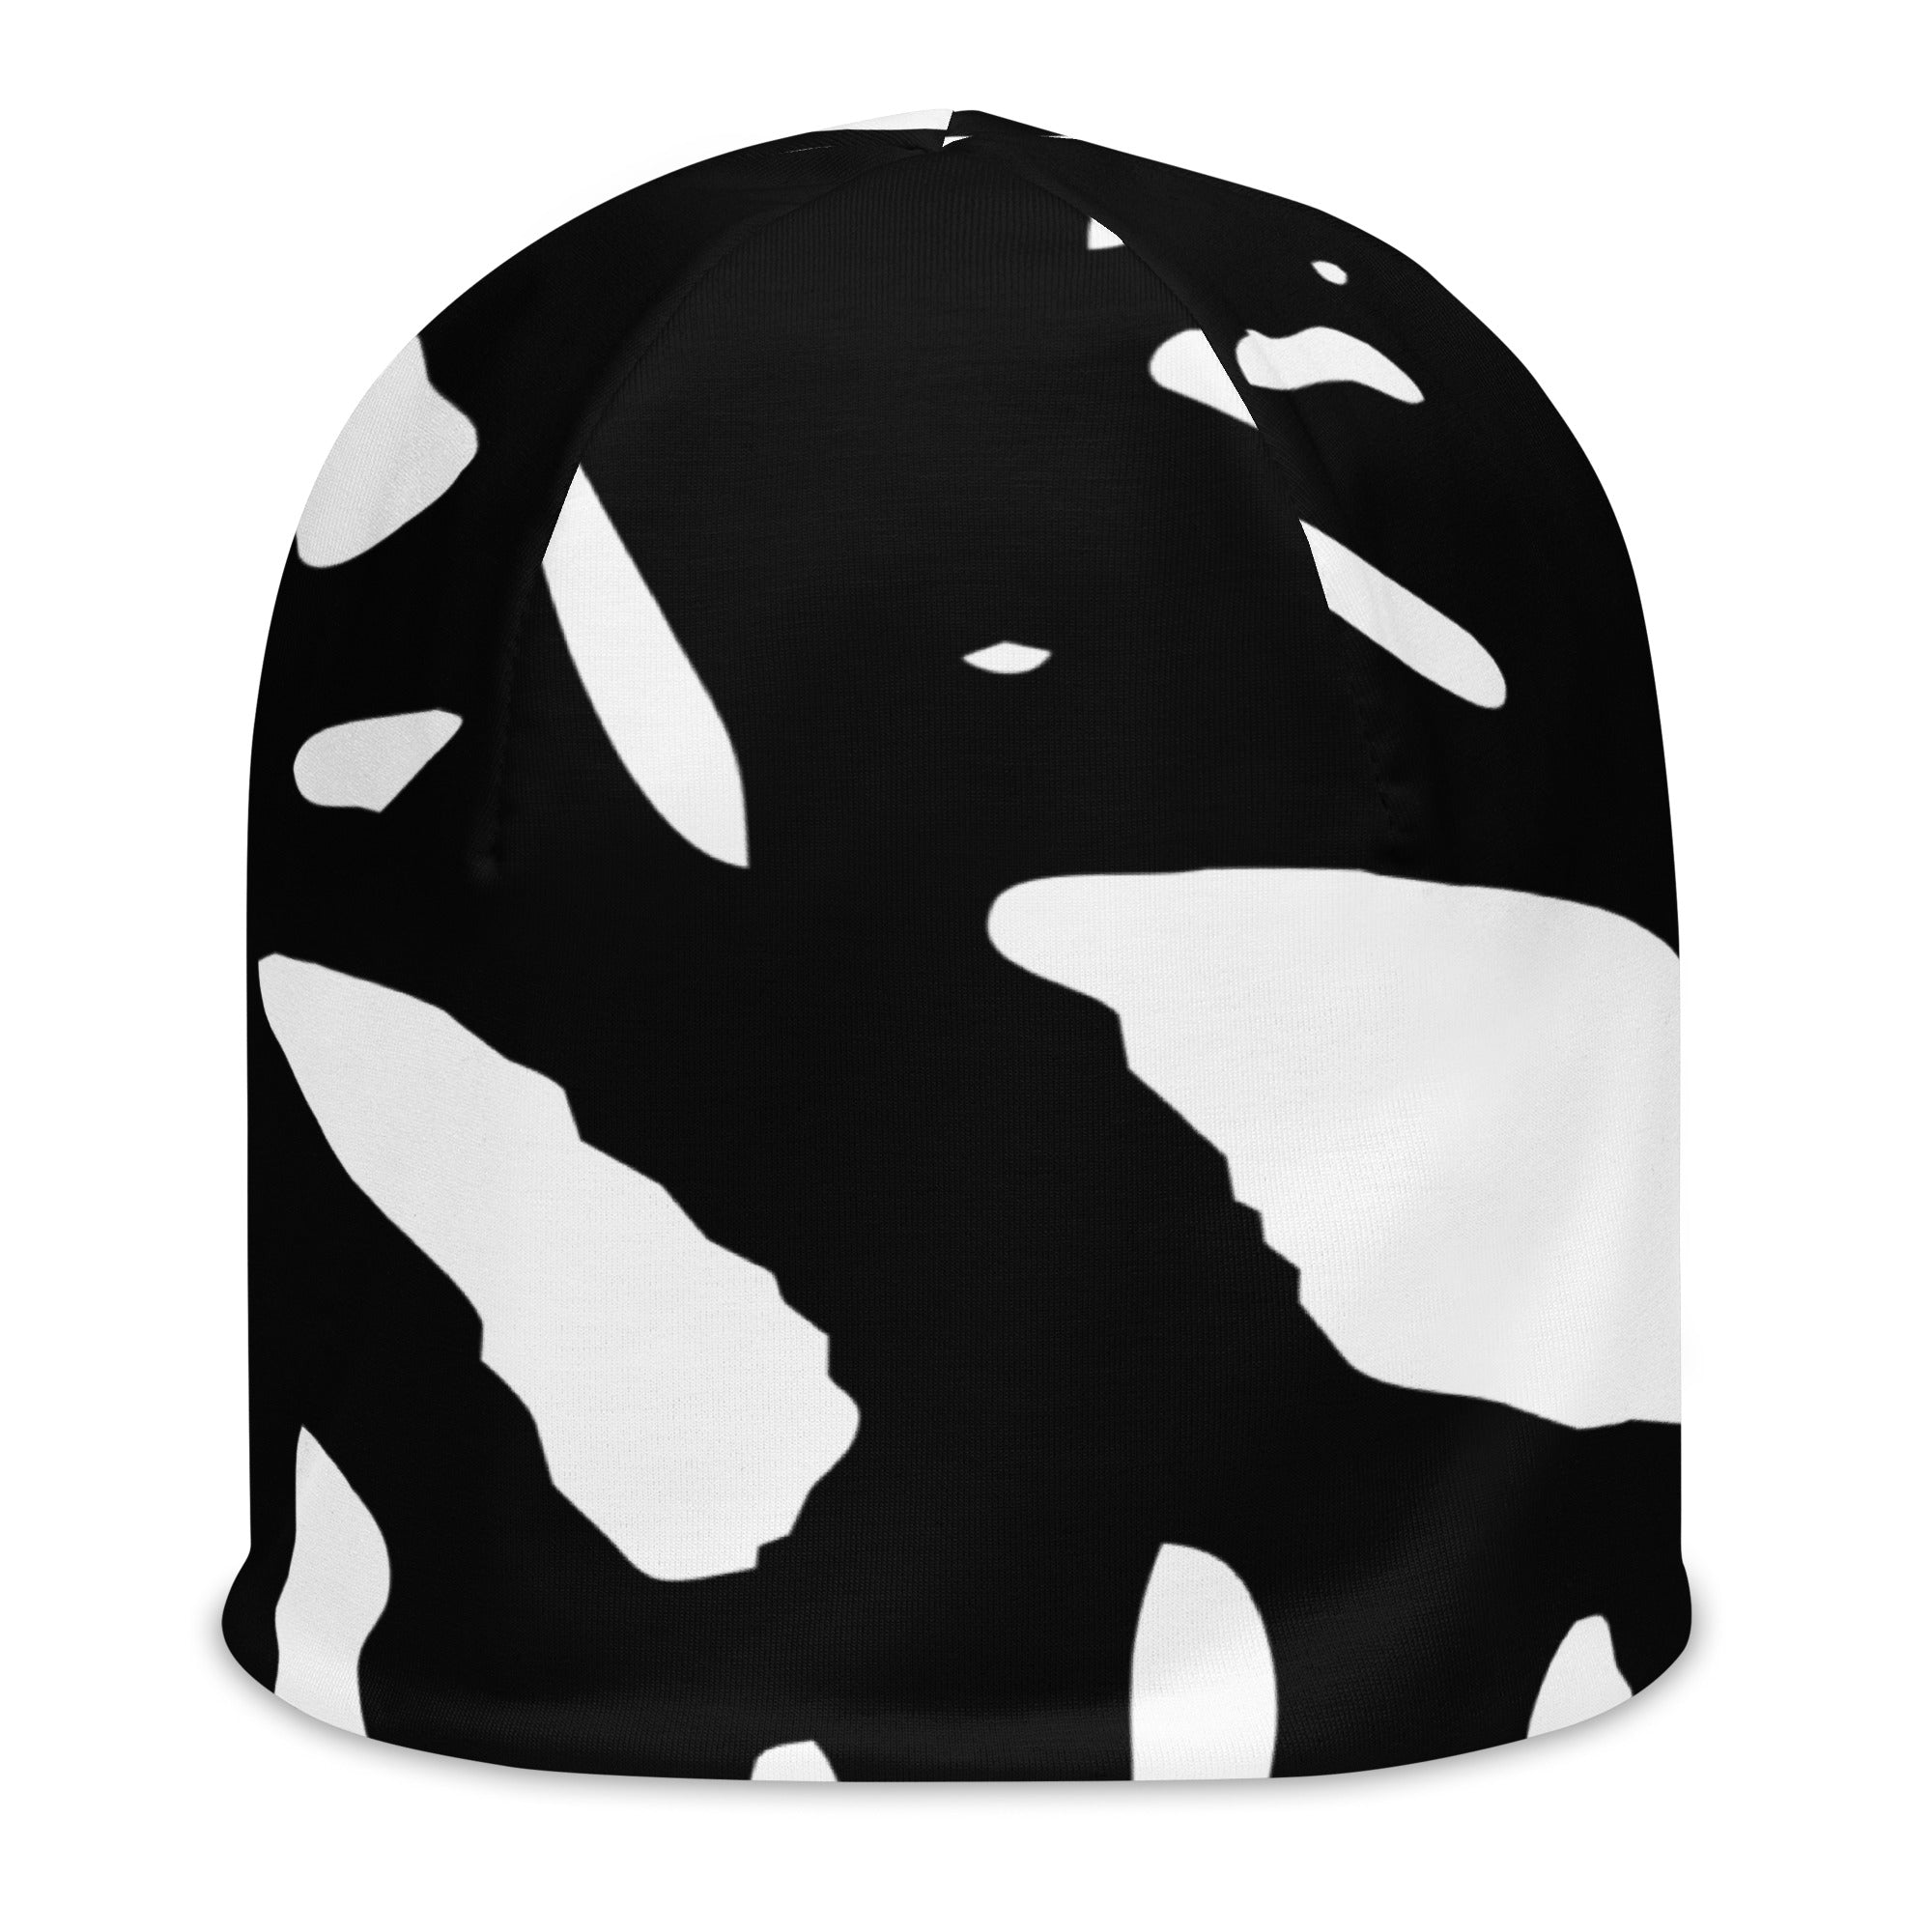 SATURATE - JOE STYLE All-Over Print Beanie